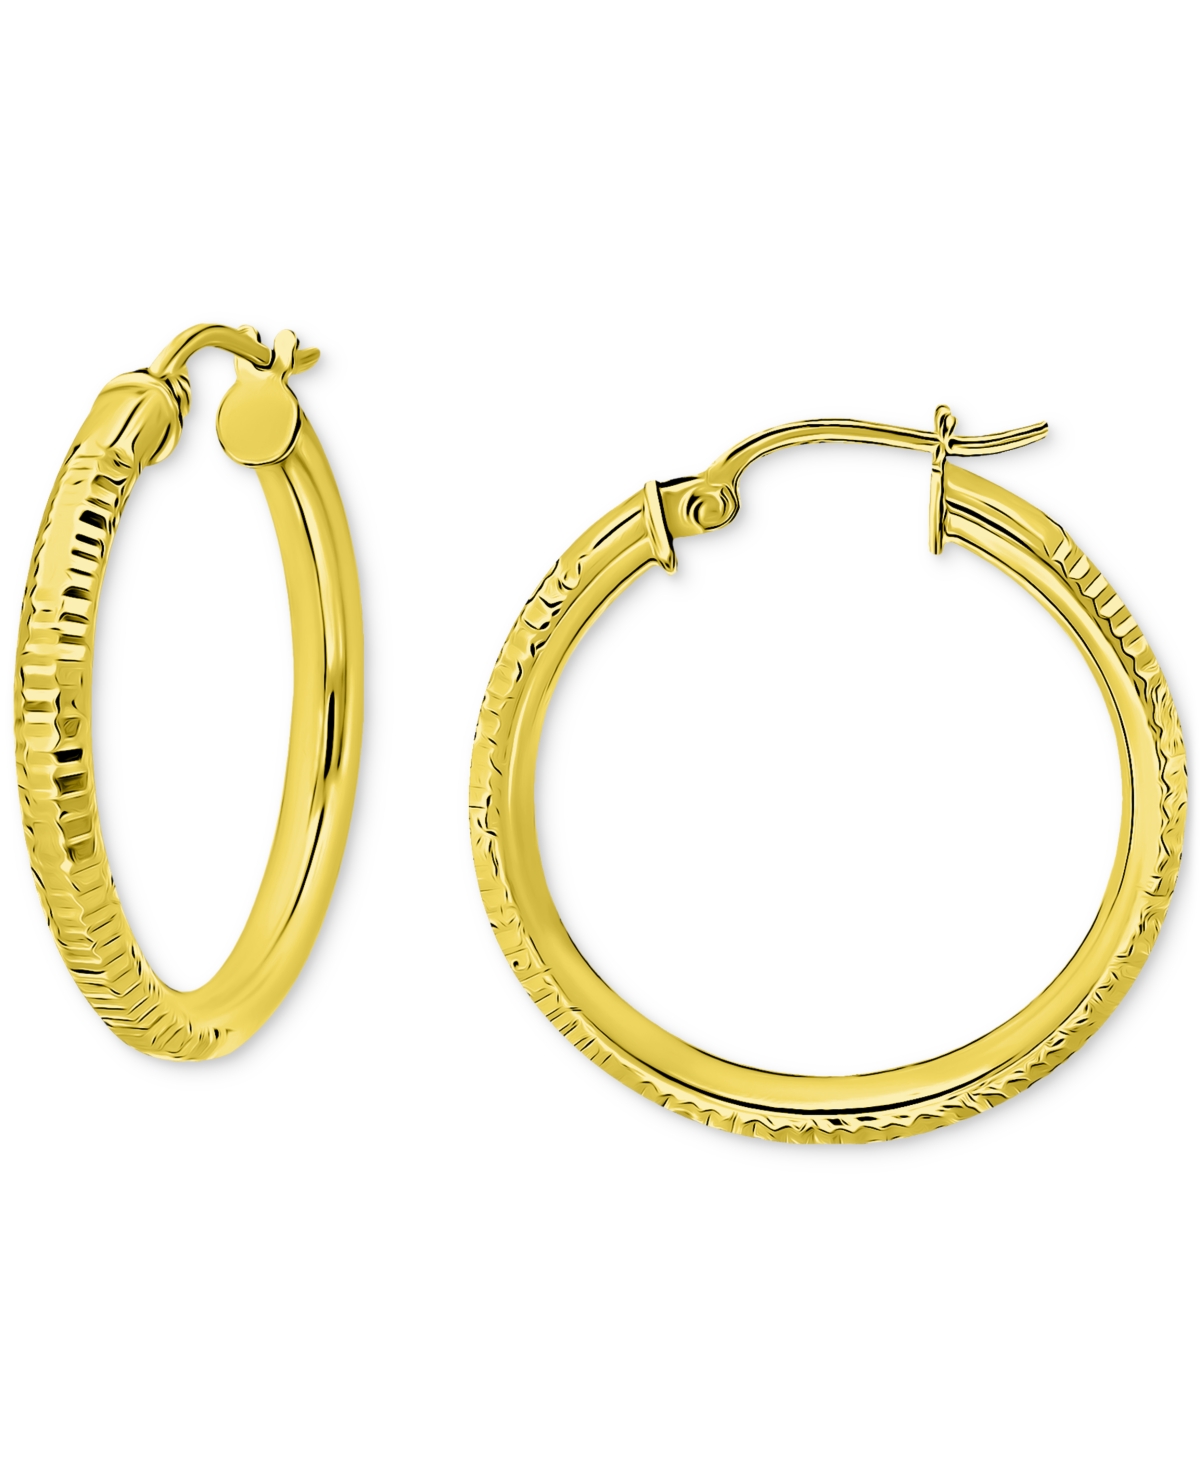 Giani Bernini Ridged Tube Small Hoop Earrings In 18k Gold-plated Sterling Silver, 25mm, Created For Macy's In Gold Over Silver